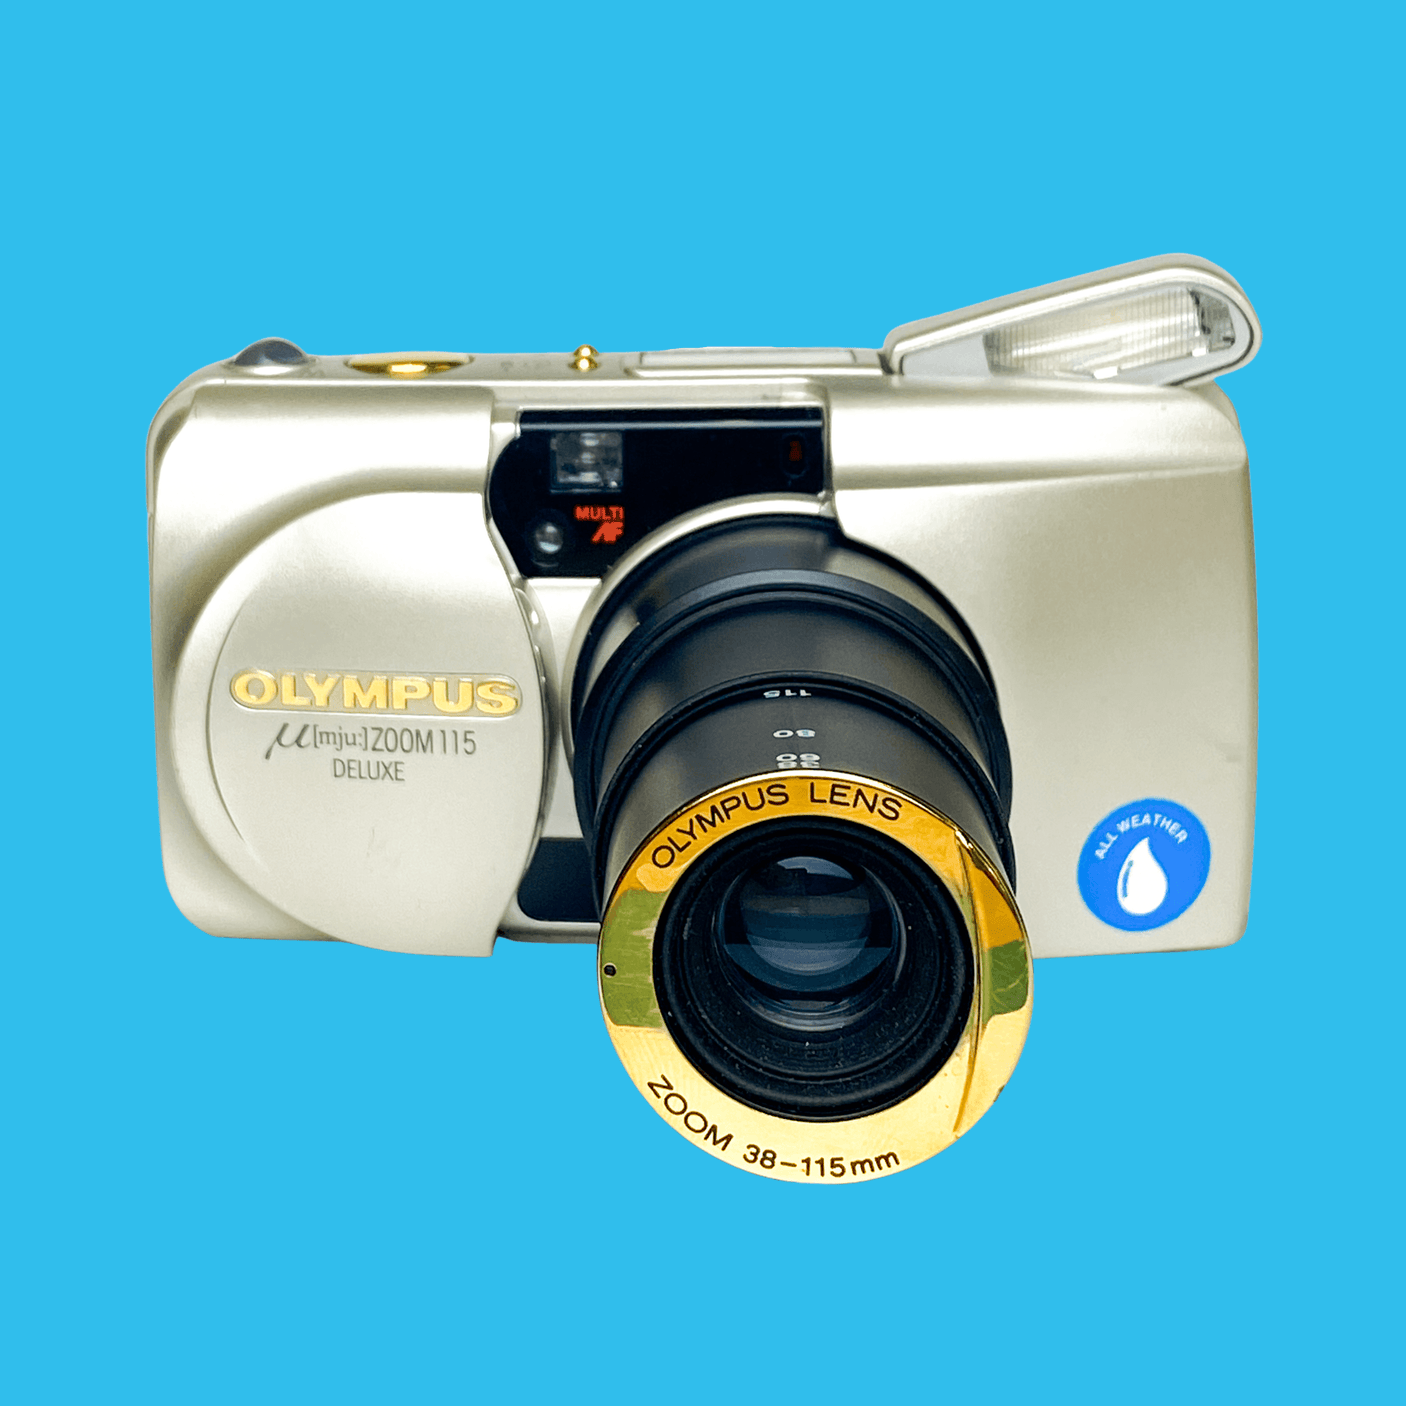 Olympus MJU Zoom 115 Deluxe 35mm Point and Shoot Film Camera.